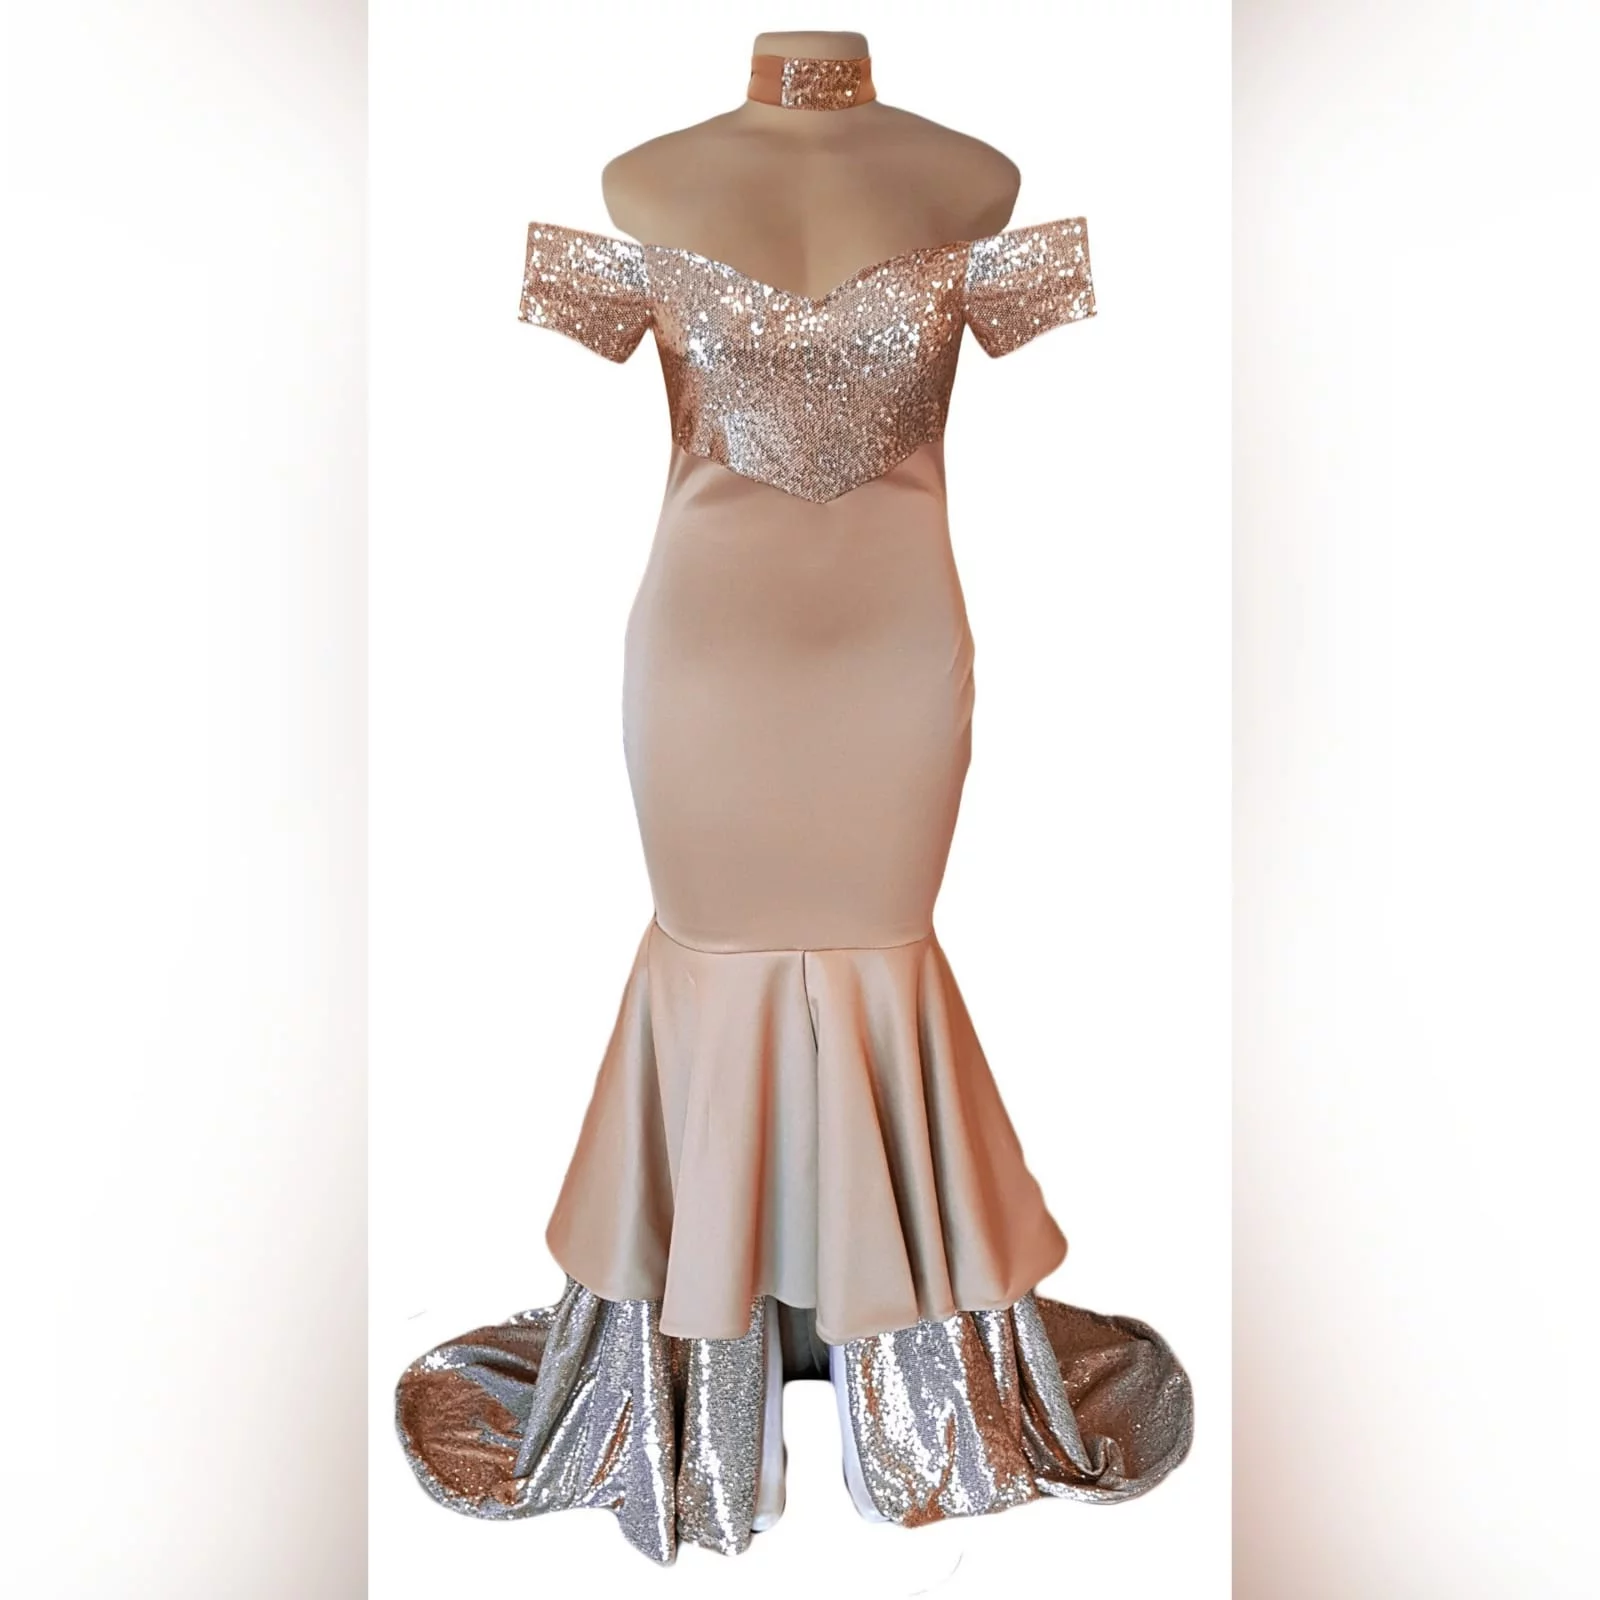 Rose gold 2 tone mermaid prom dress 7 rose gold 2 tone mermaid prom dress, off-shoulder dress with a sweetheart neckline and off-shoulder short sleeves. Double layer from knee down, with sequins, creating a train with a slit int the front middle. Comes with a matching choker.